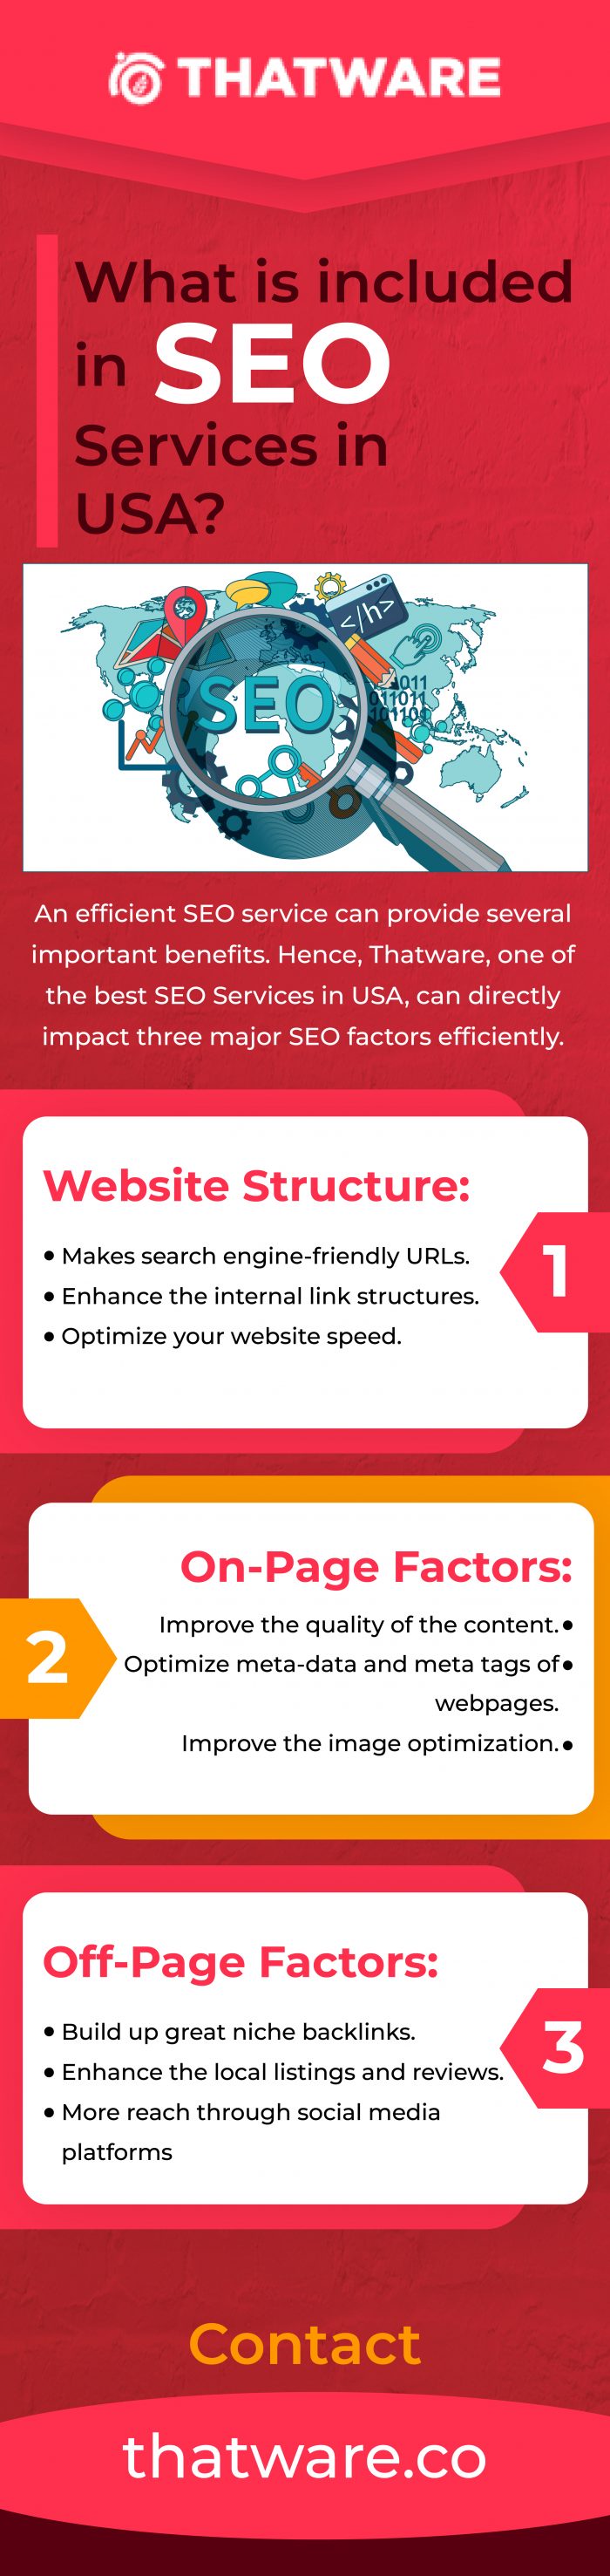 What is included in SEO Services in USA?